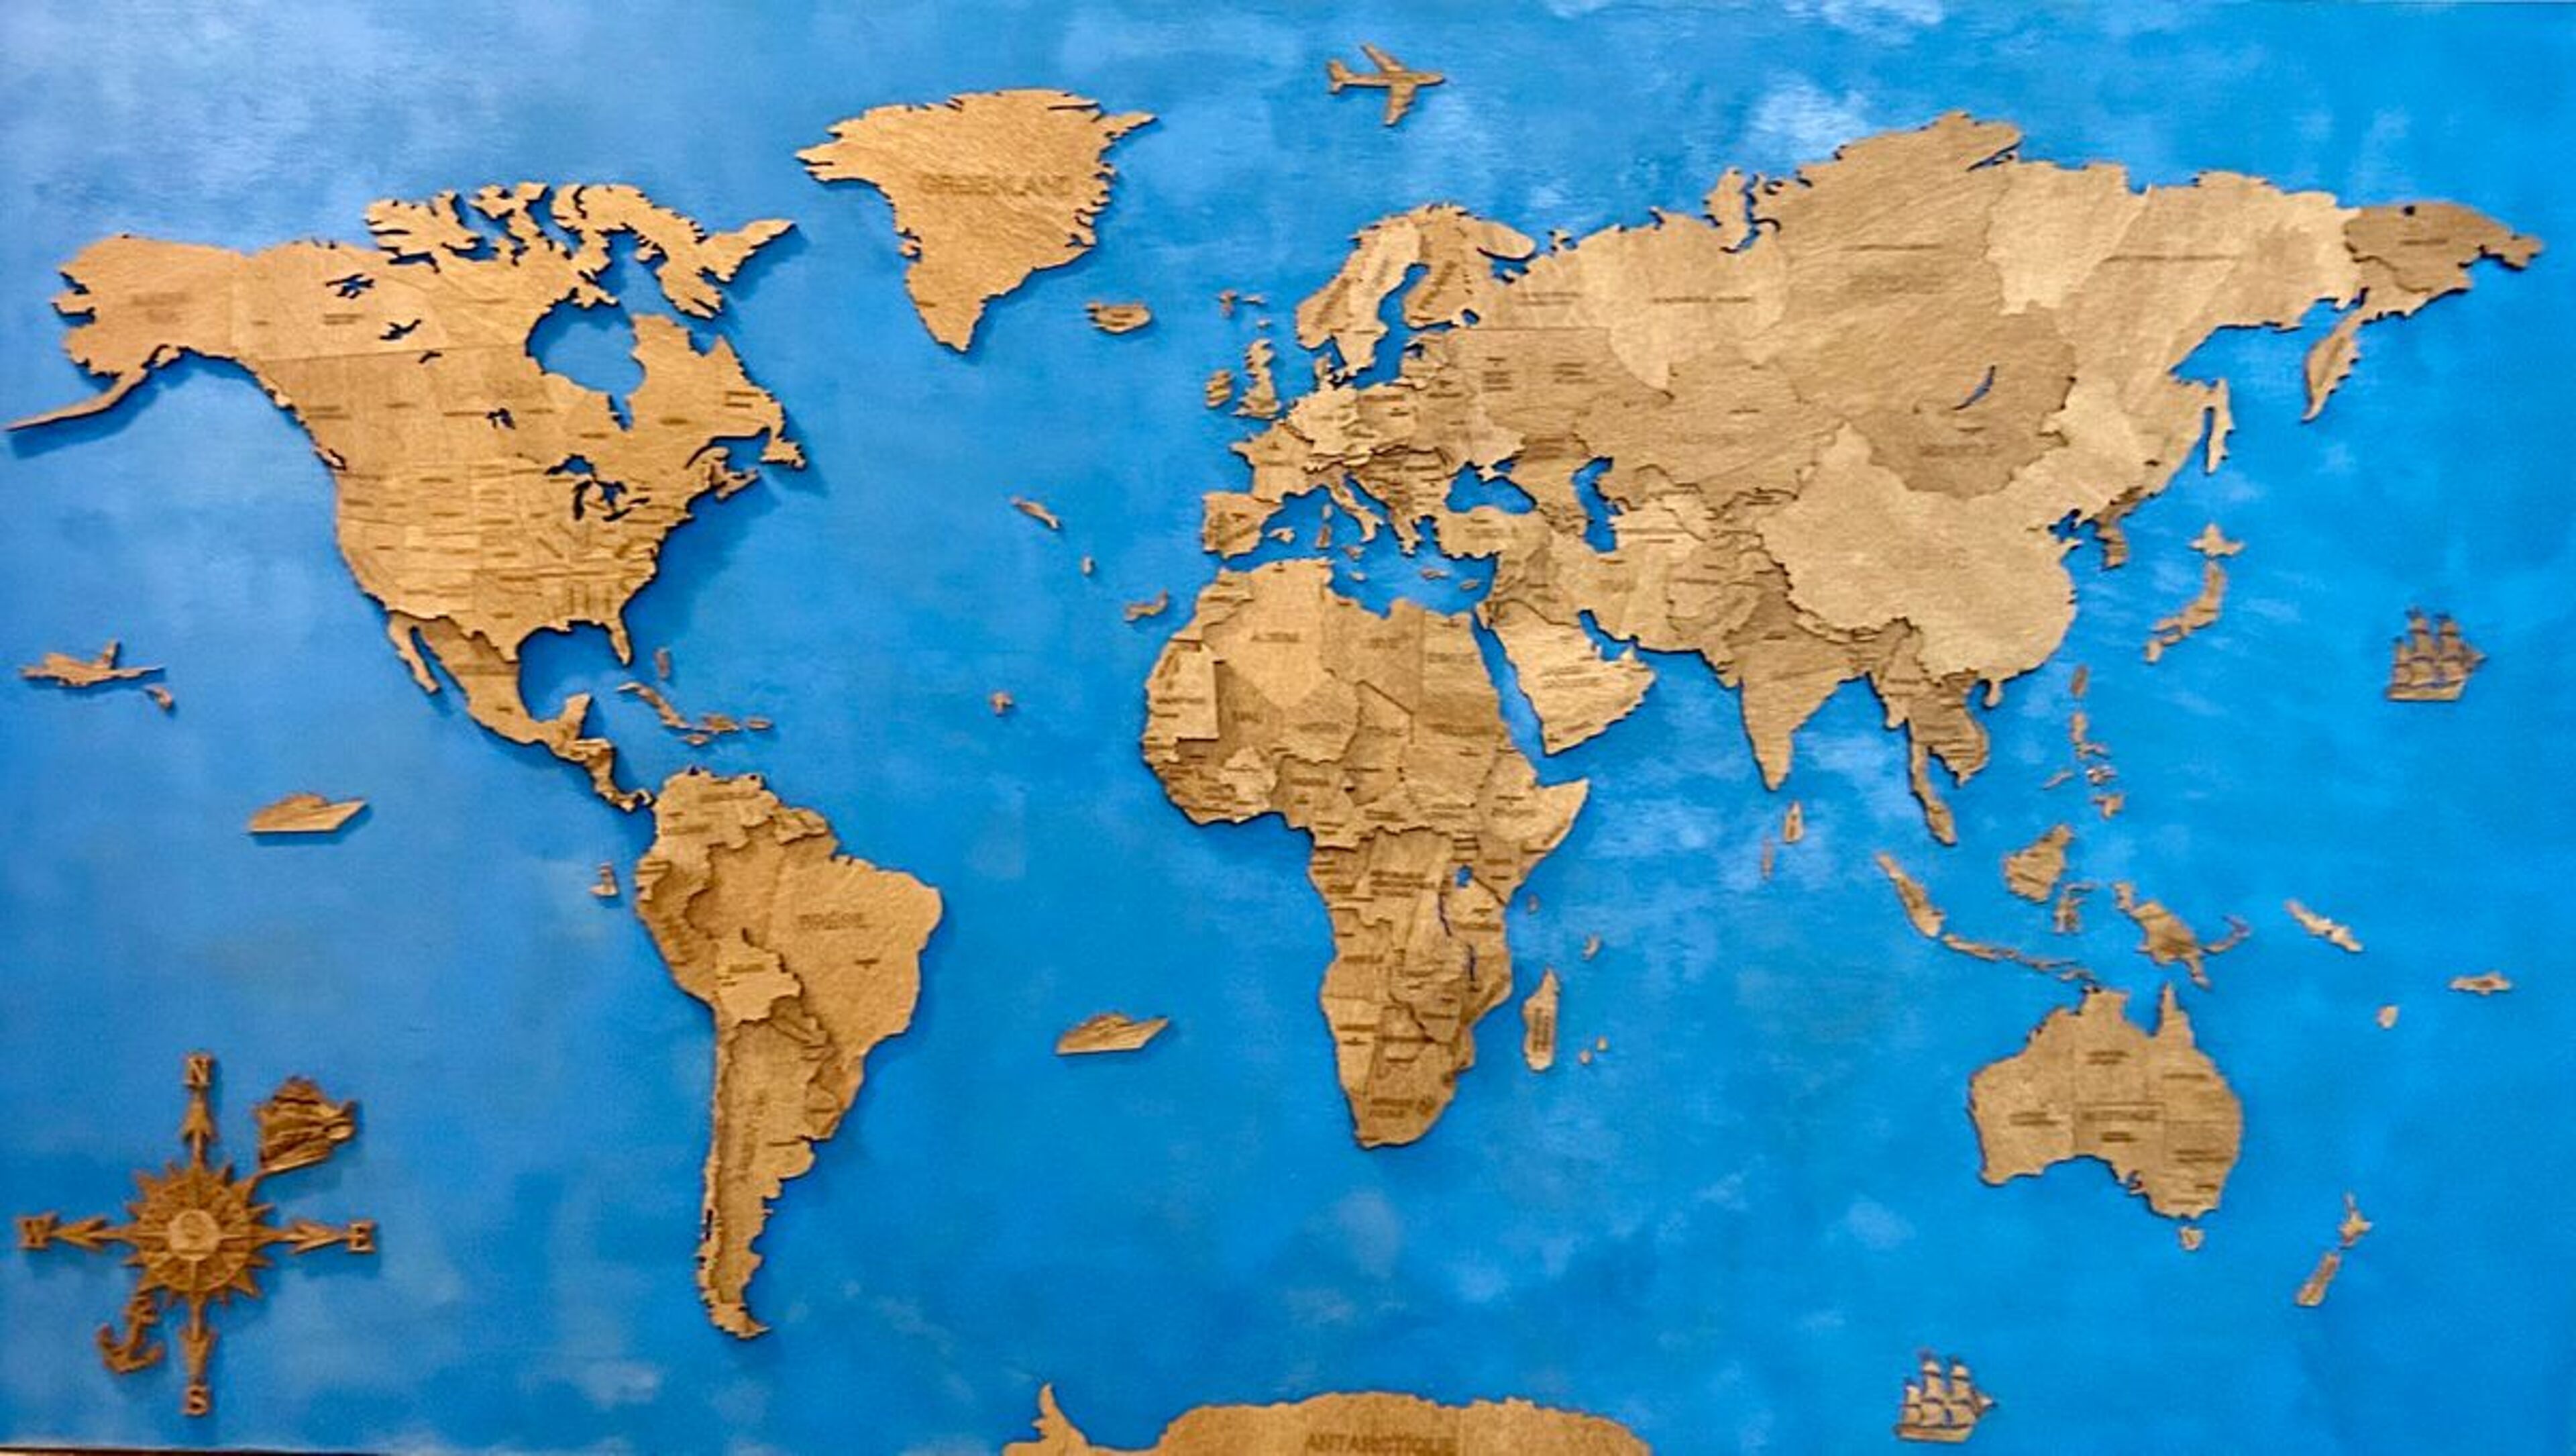 Review for Wooden World Map Wall Decoration - image from Tristan C.